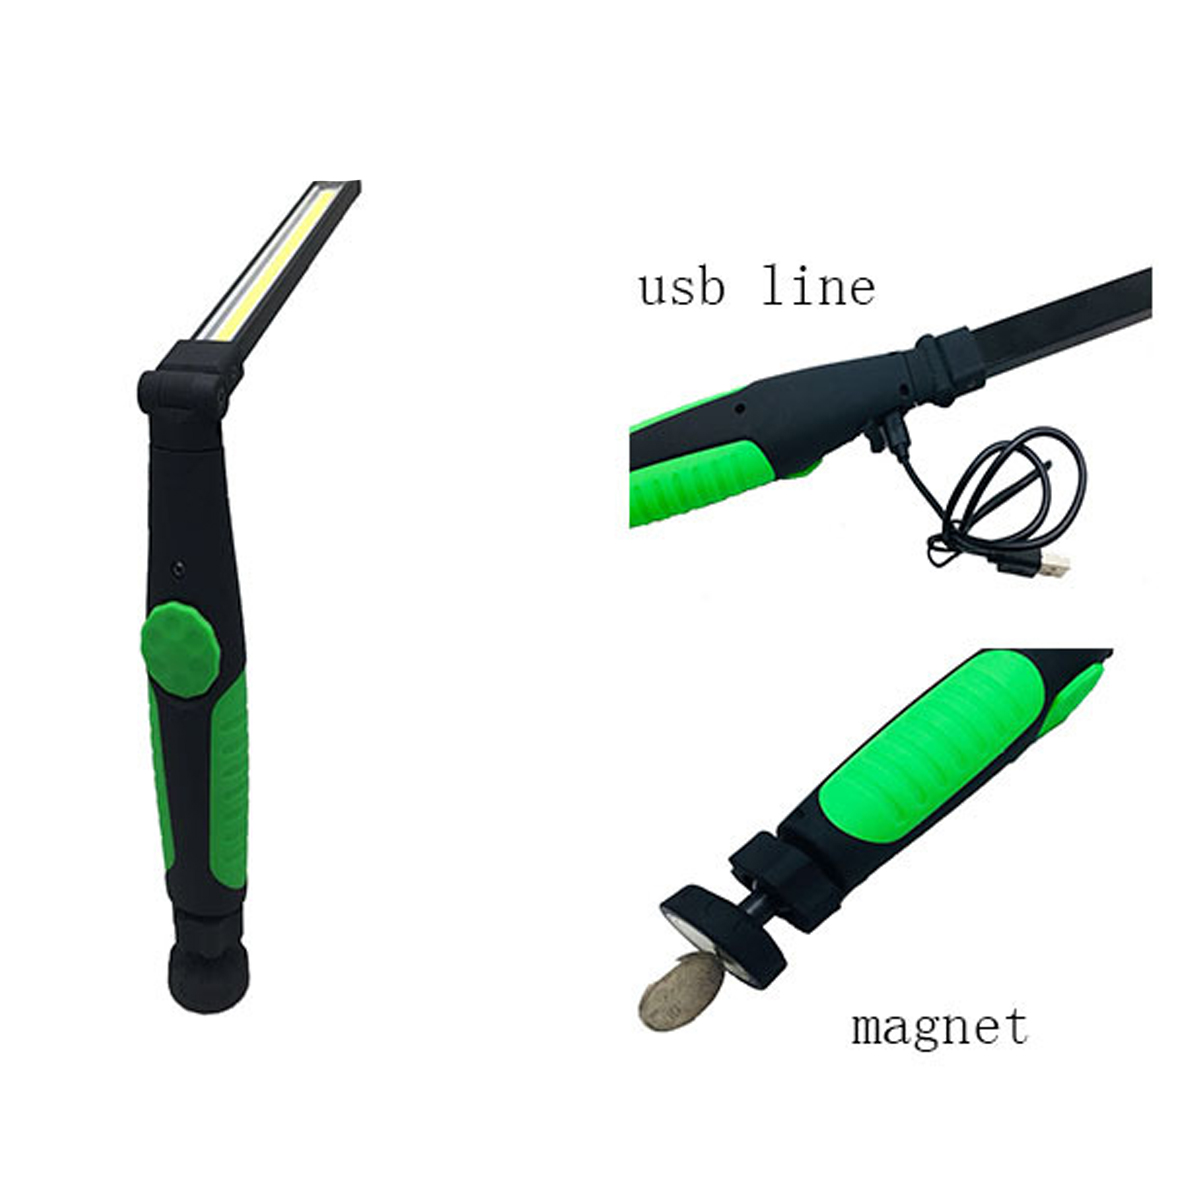 410-Lumens-Multifunction-COB-LED-Flashlight-Folding-Magnetic-Attraction-USB-Rechargeable-Working-Lig-1696699-4